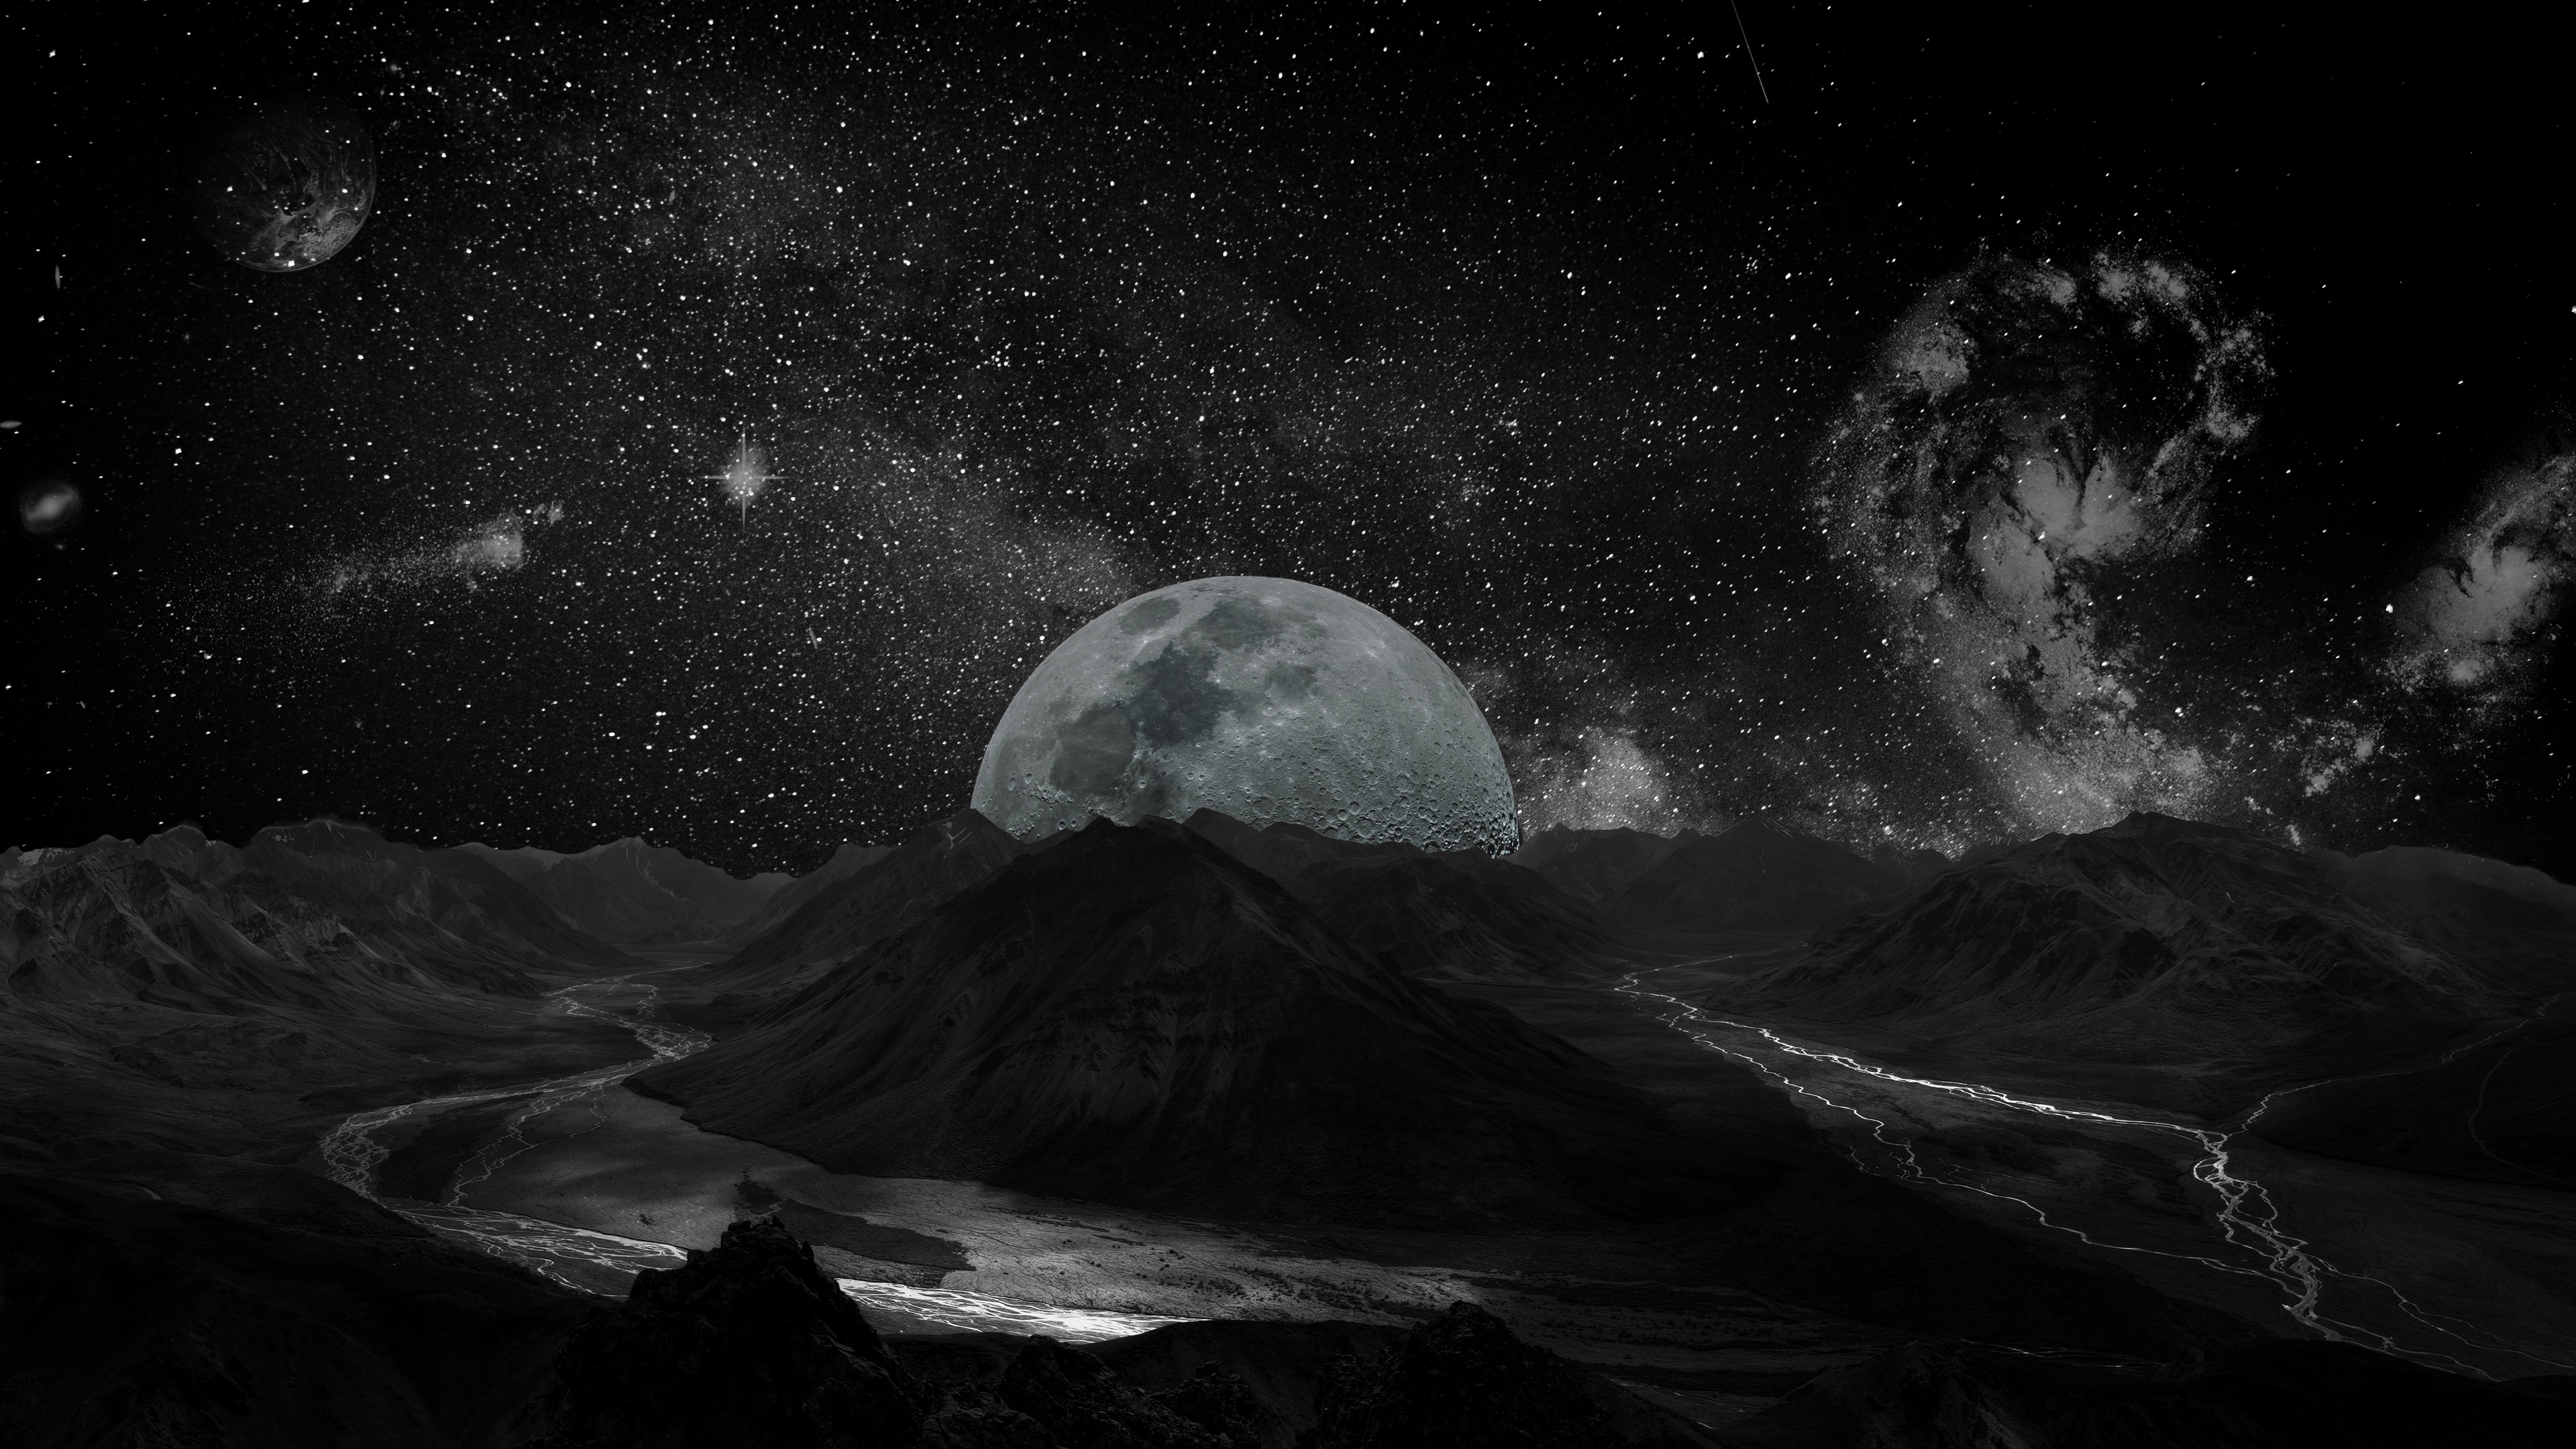 space wallpaper 4k,moon,nature,black,astronomical object,black and white